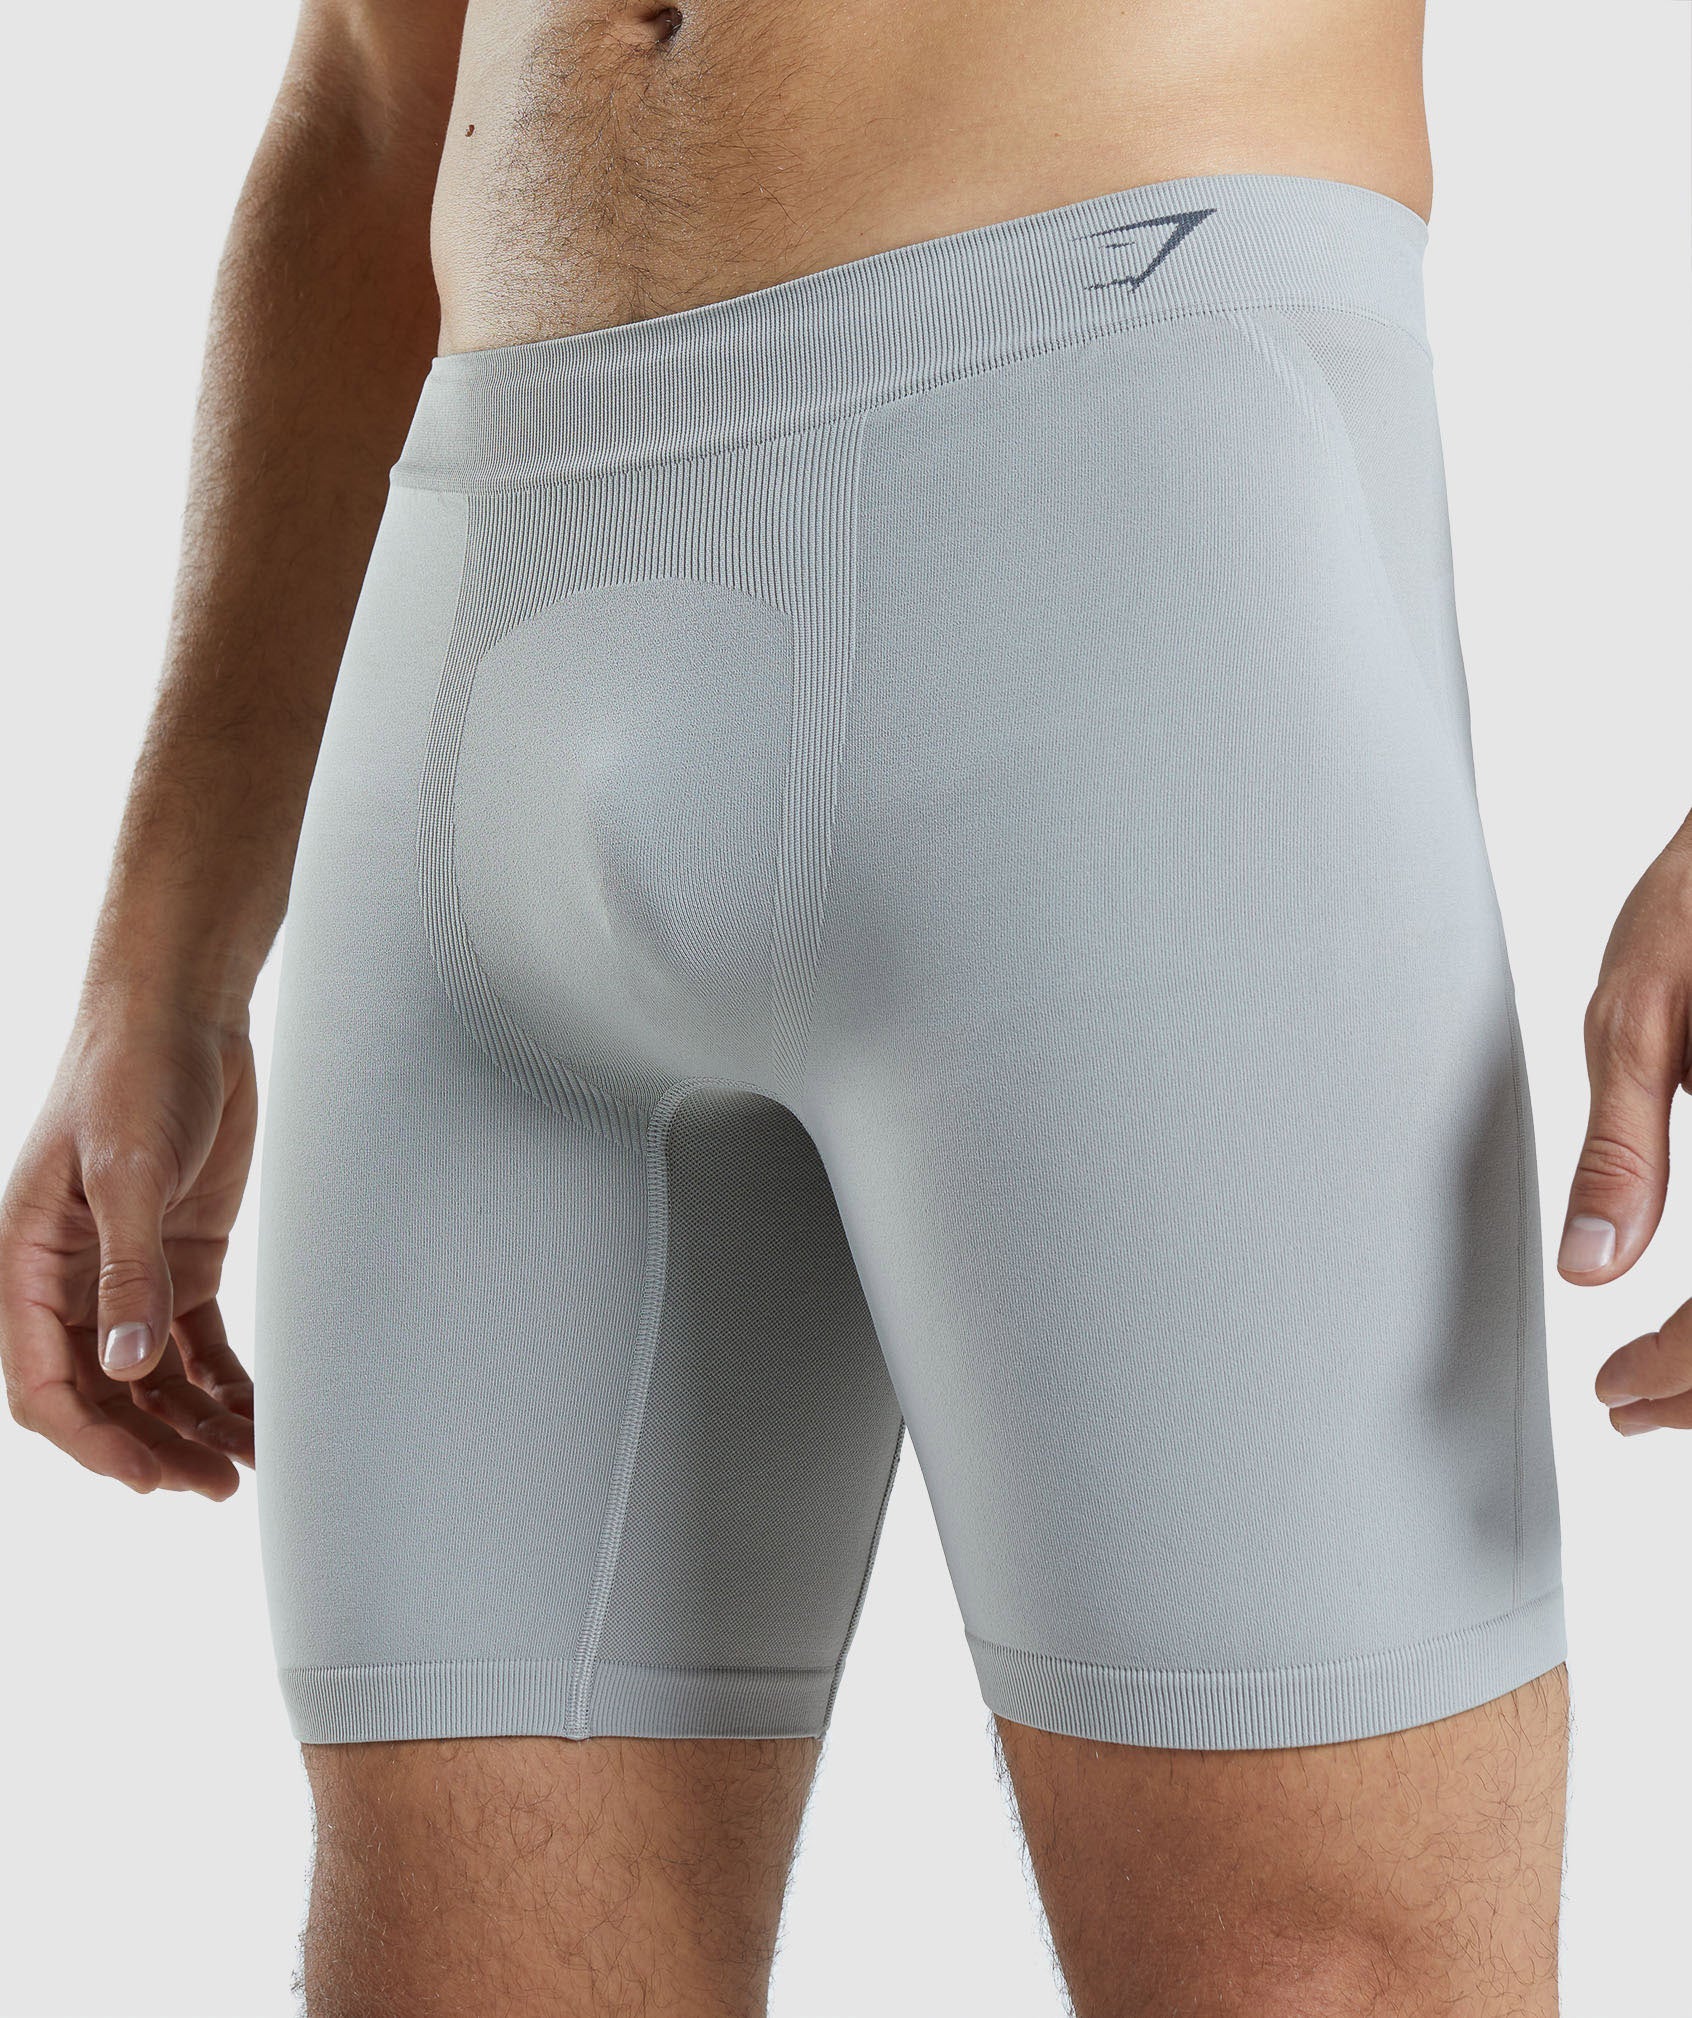 Hybrid Boxer in Taupe Grey/Onyx Grey - view 7